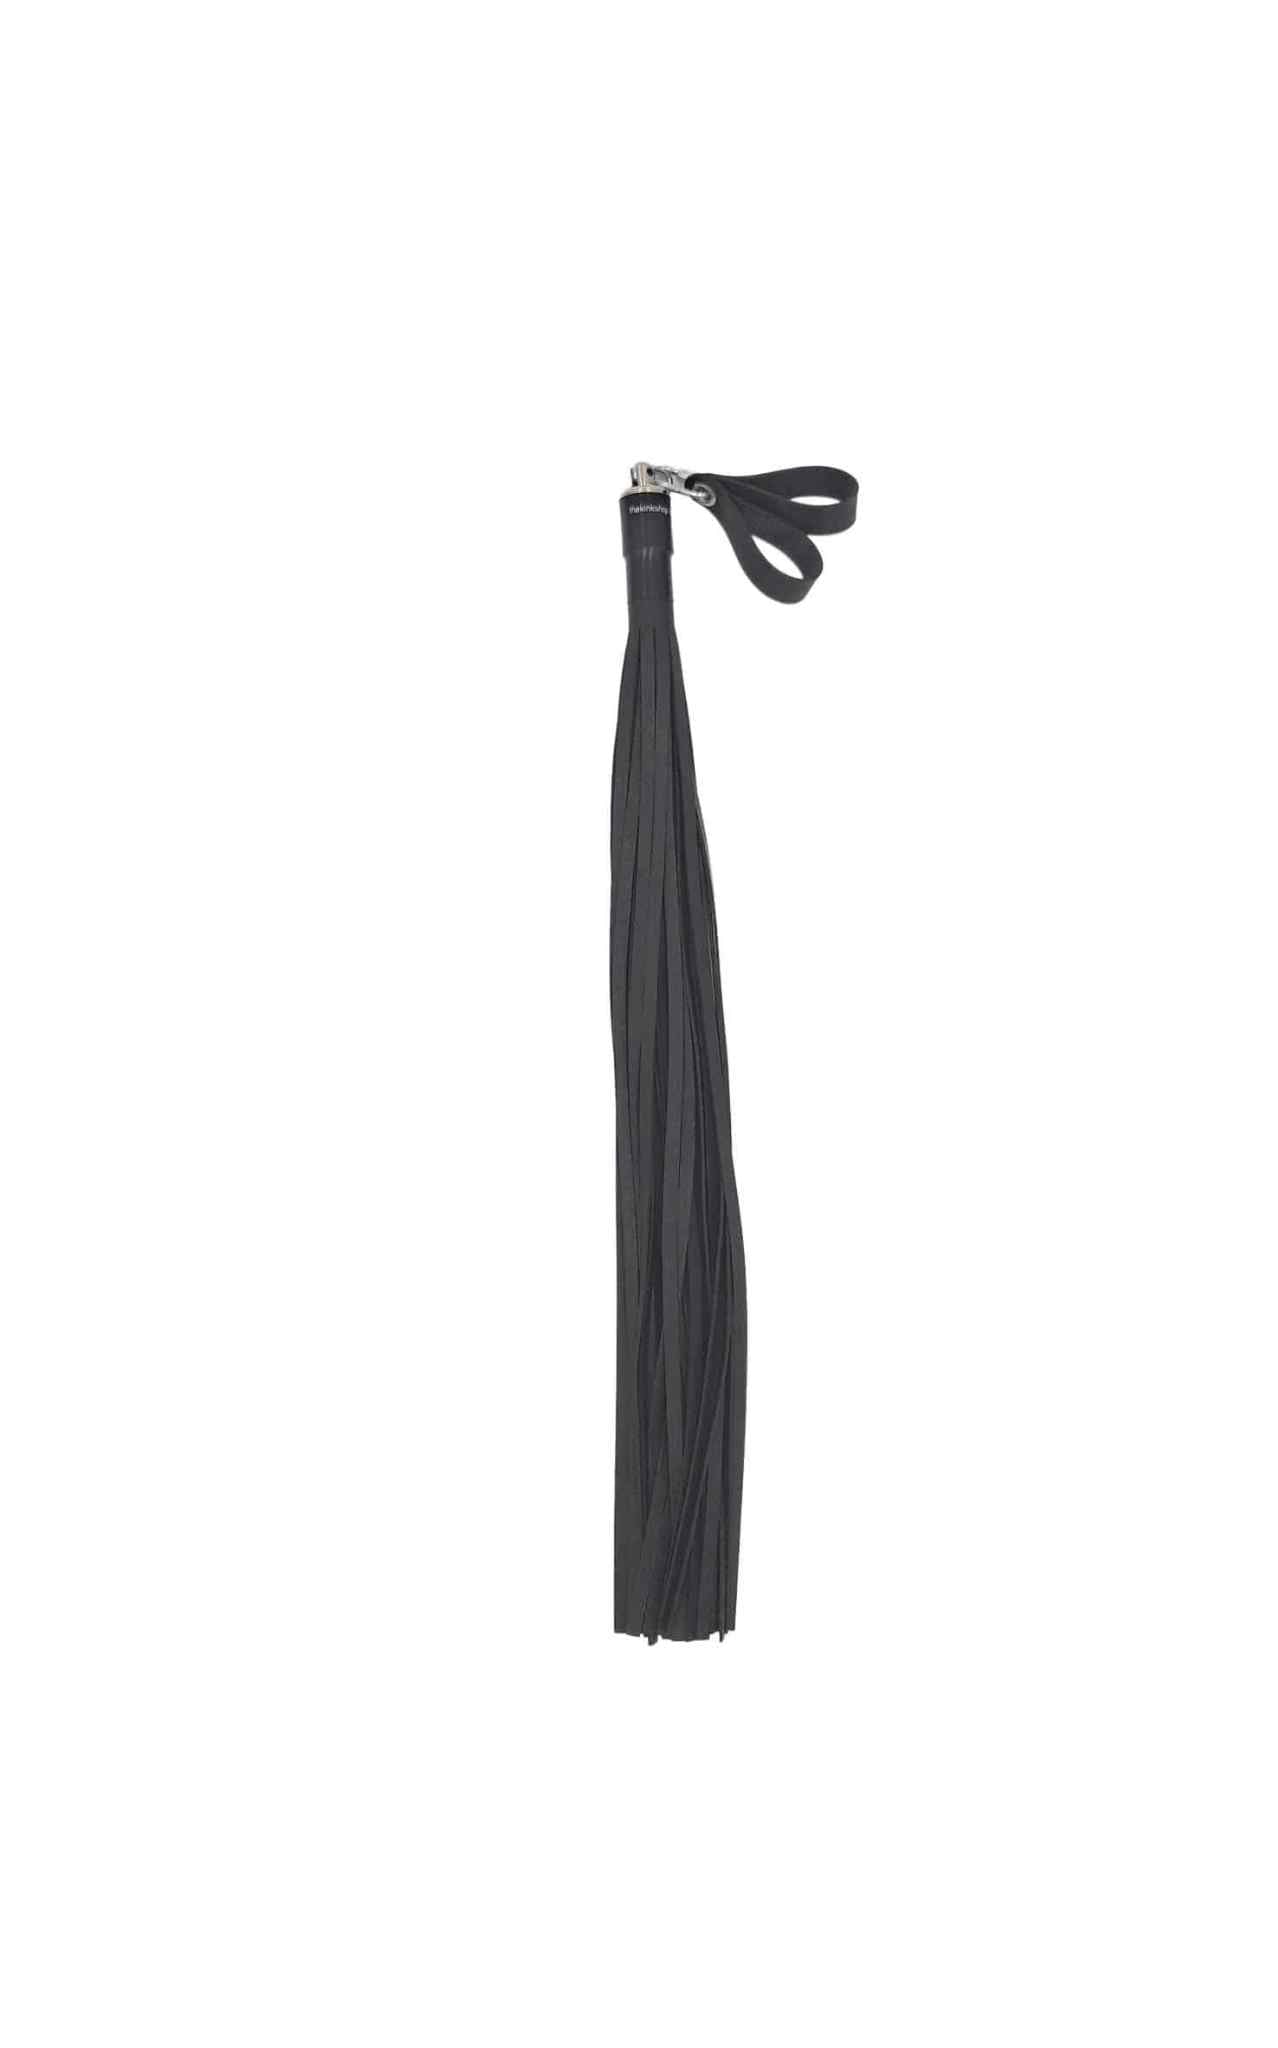 The Electro Rubber Flogger for Violet Wand hanging upright.